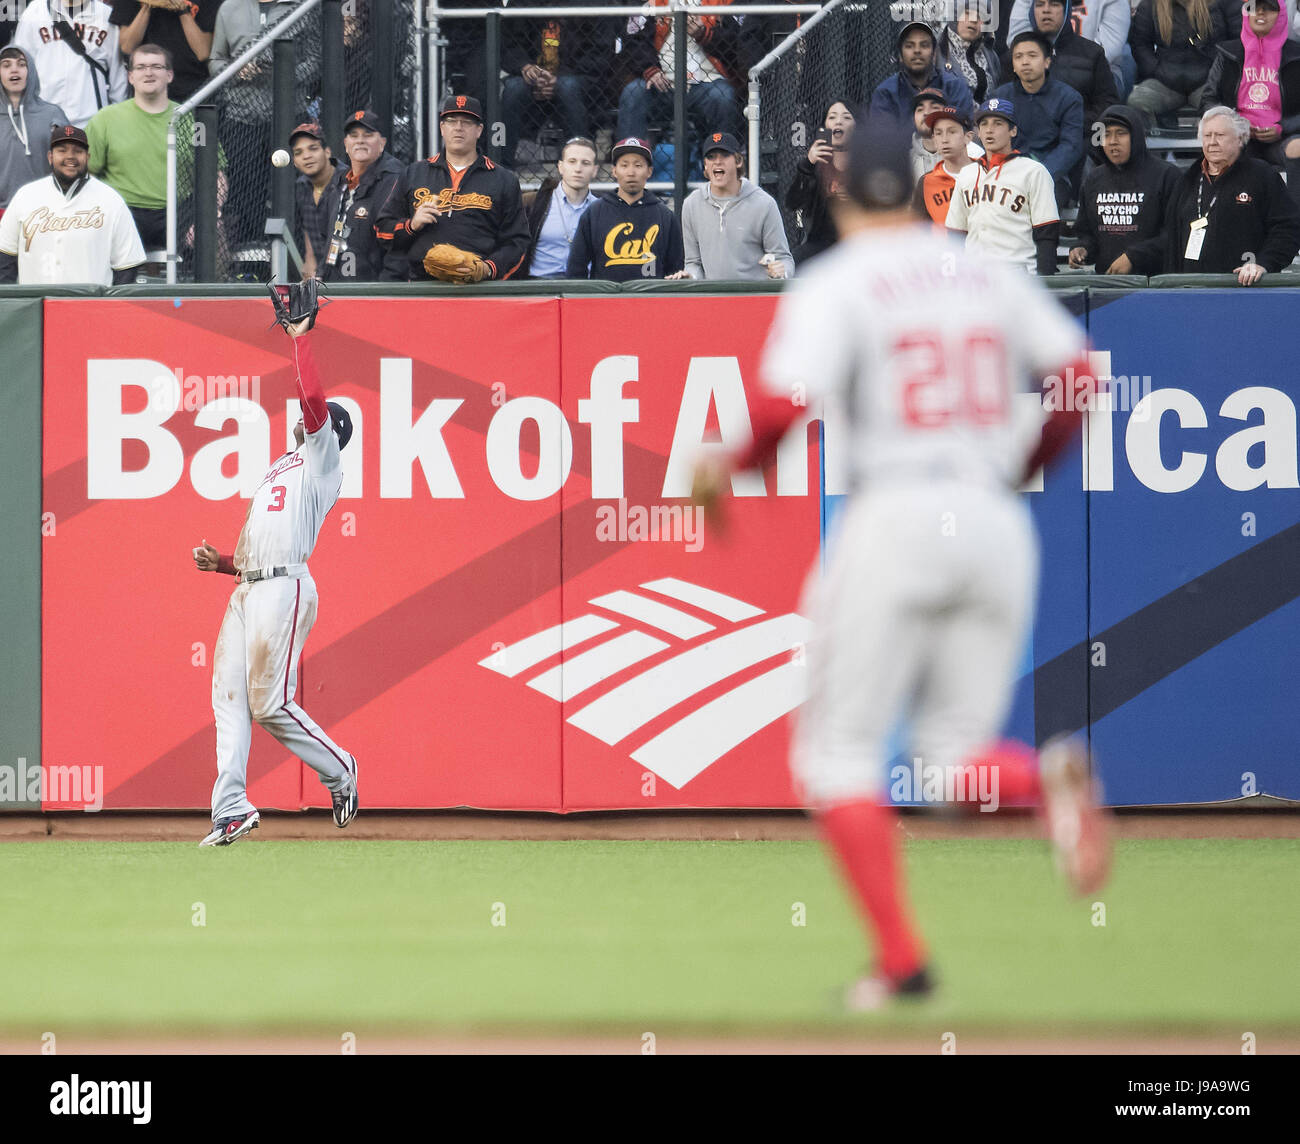 San Francisco, California, USA. 31st May, 2017. Fans watch as Washington Nationals center fielder Michael Taylor (3) catching a long Buster Posey fly during a MLB baseball game between the Washington Nationals and the San Francisco Giants on Japanese Heritage Night at AT&T Park in San Francisco, California. Valerie Shoaps/CSM/Alamy Live News Stock Photo